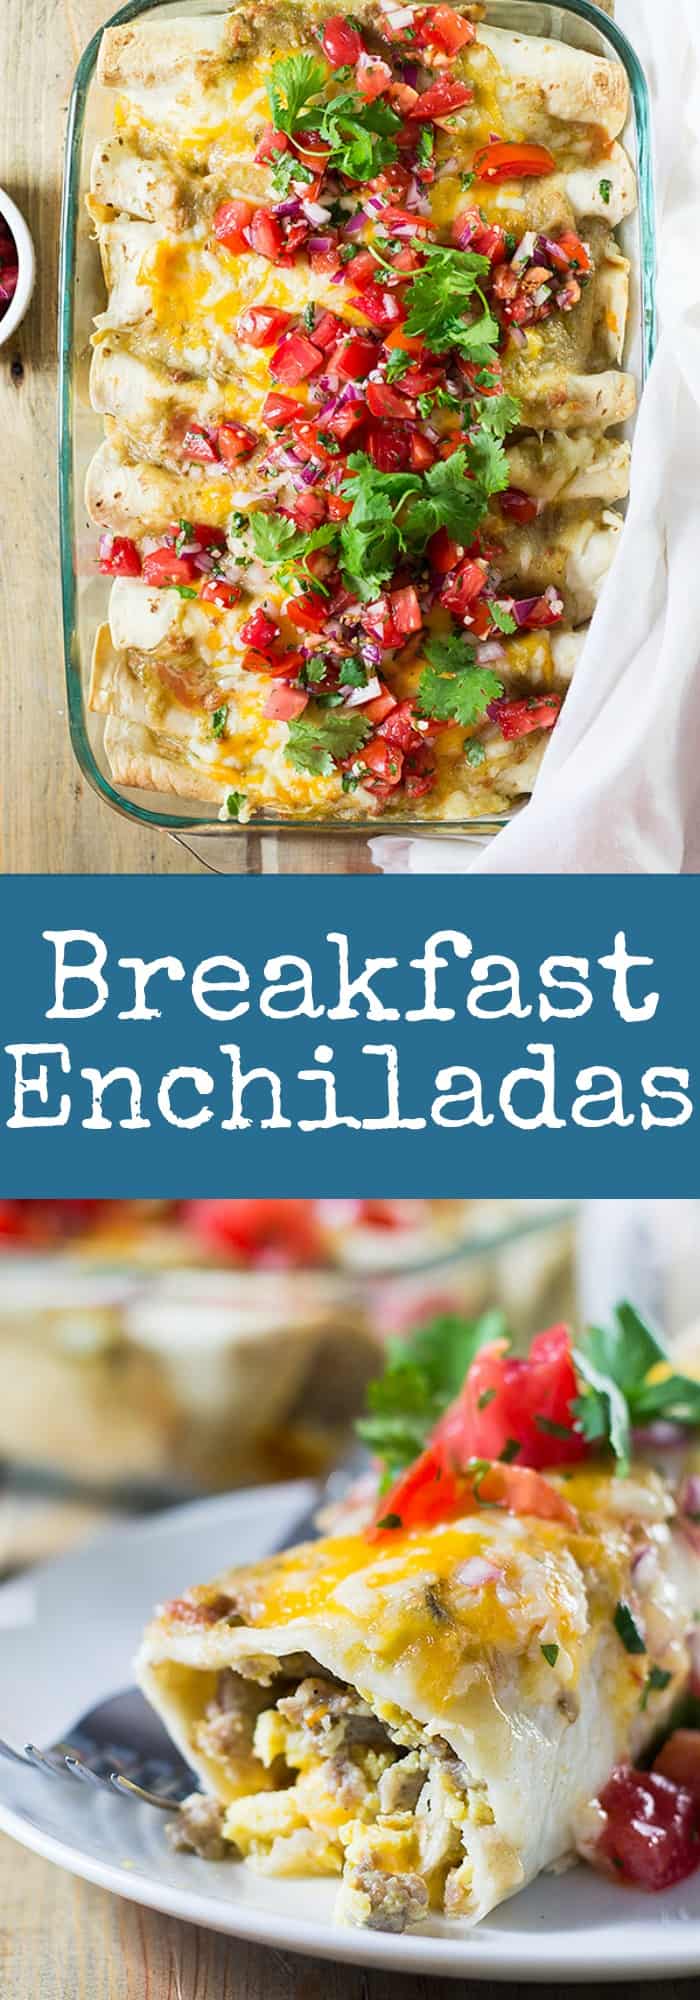 Breakfast Enchiladas filled with scrambled eggs, sausage, green chilies and cheese with text overlay